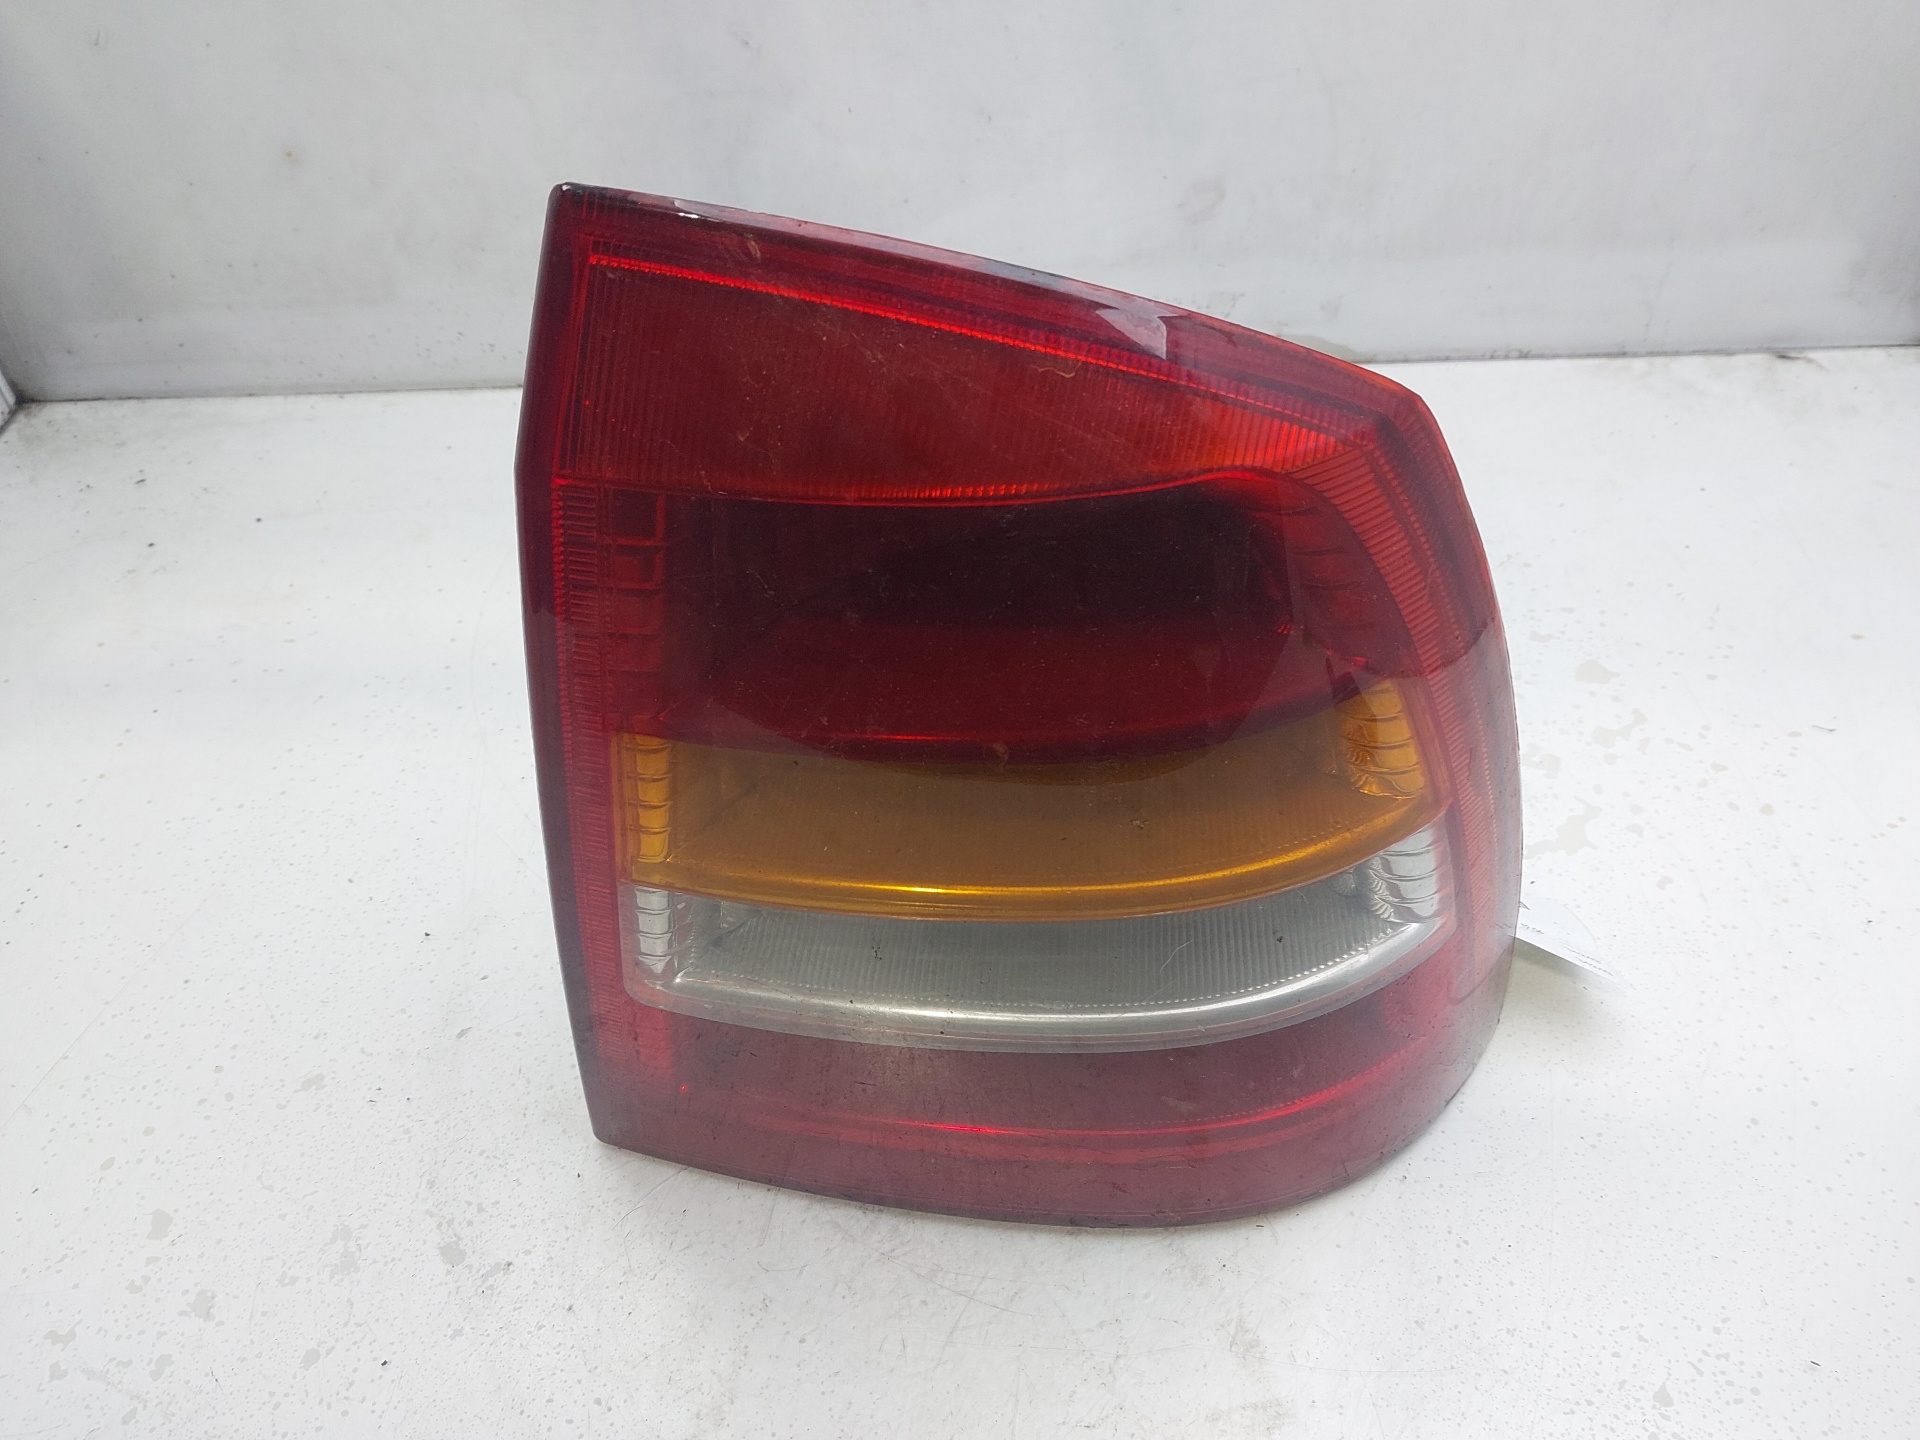 OPEL Astra H (2004-2014) Rear Right Taillight Lamp 13110931 23988689